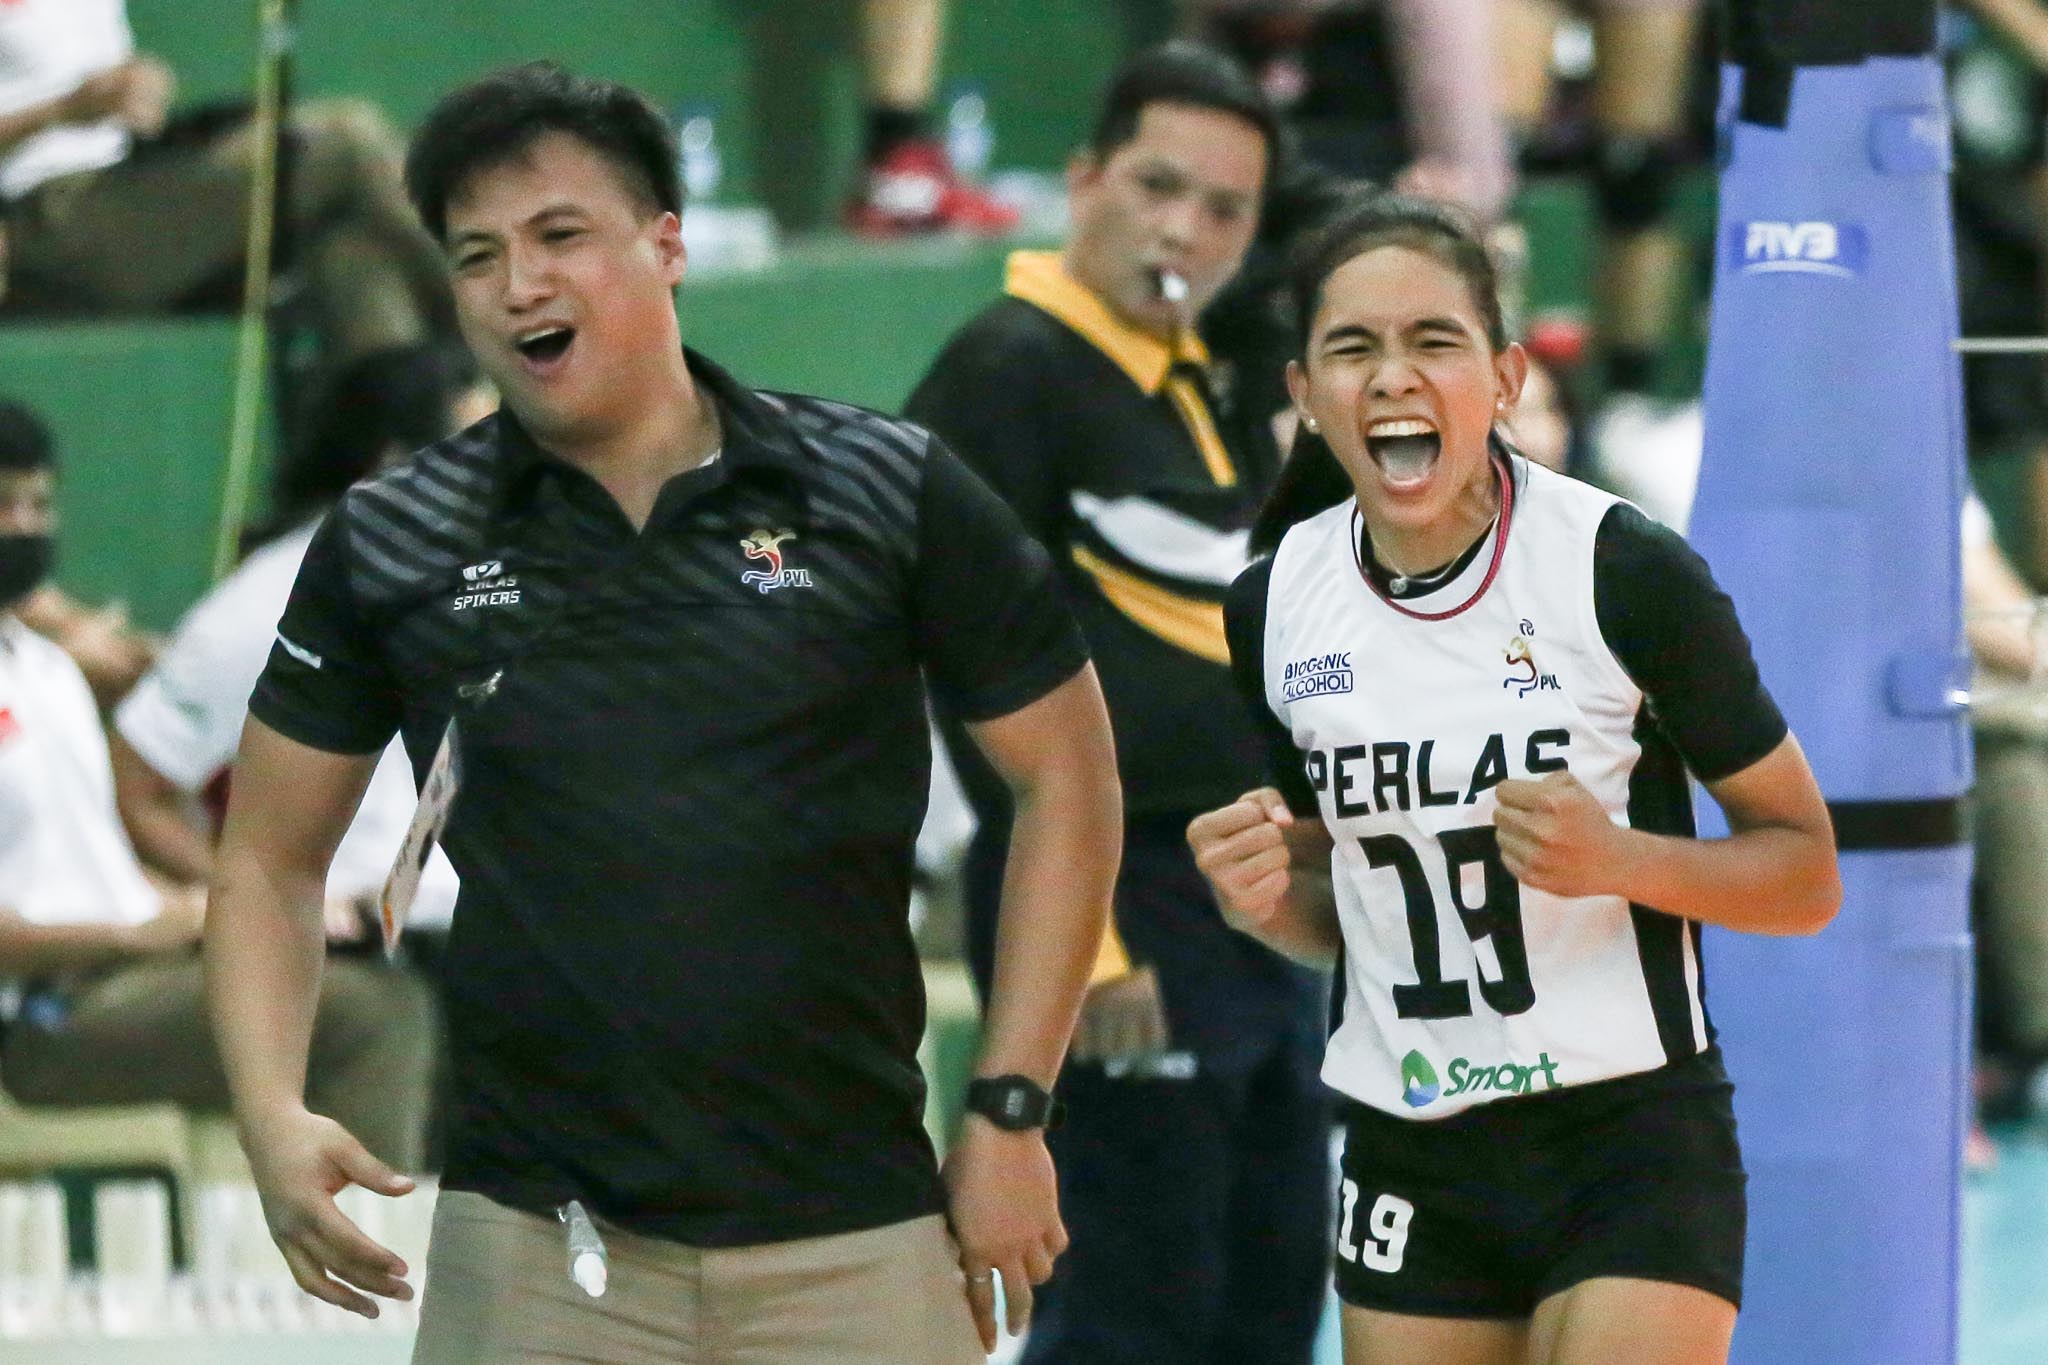 2021-PVL-Open-Cignal-vs-Perlas-Rei-Diaz-and-Nicole-Tiamzon-1 Perlas looking to build on silver-linings heading to next PVL conference News PVL Volleyball  - philippine sports news